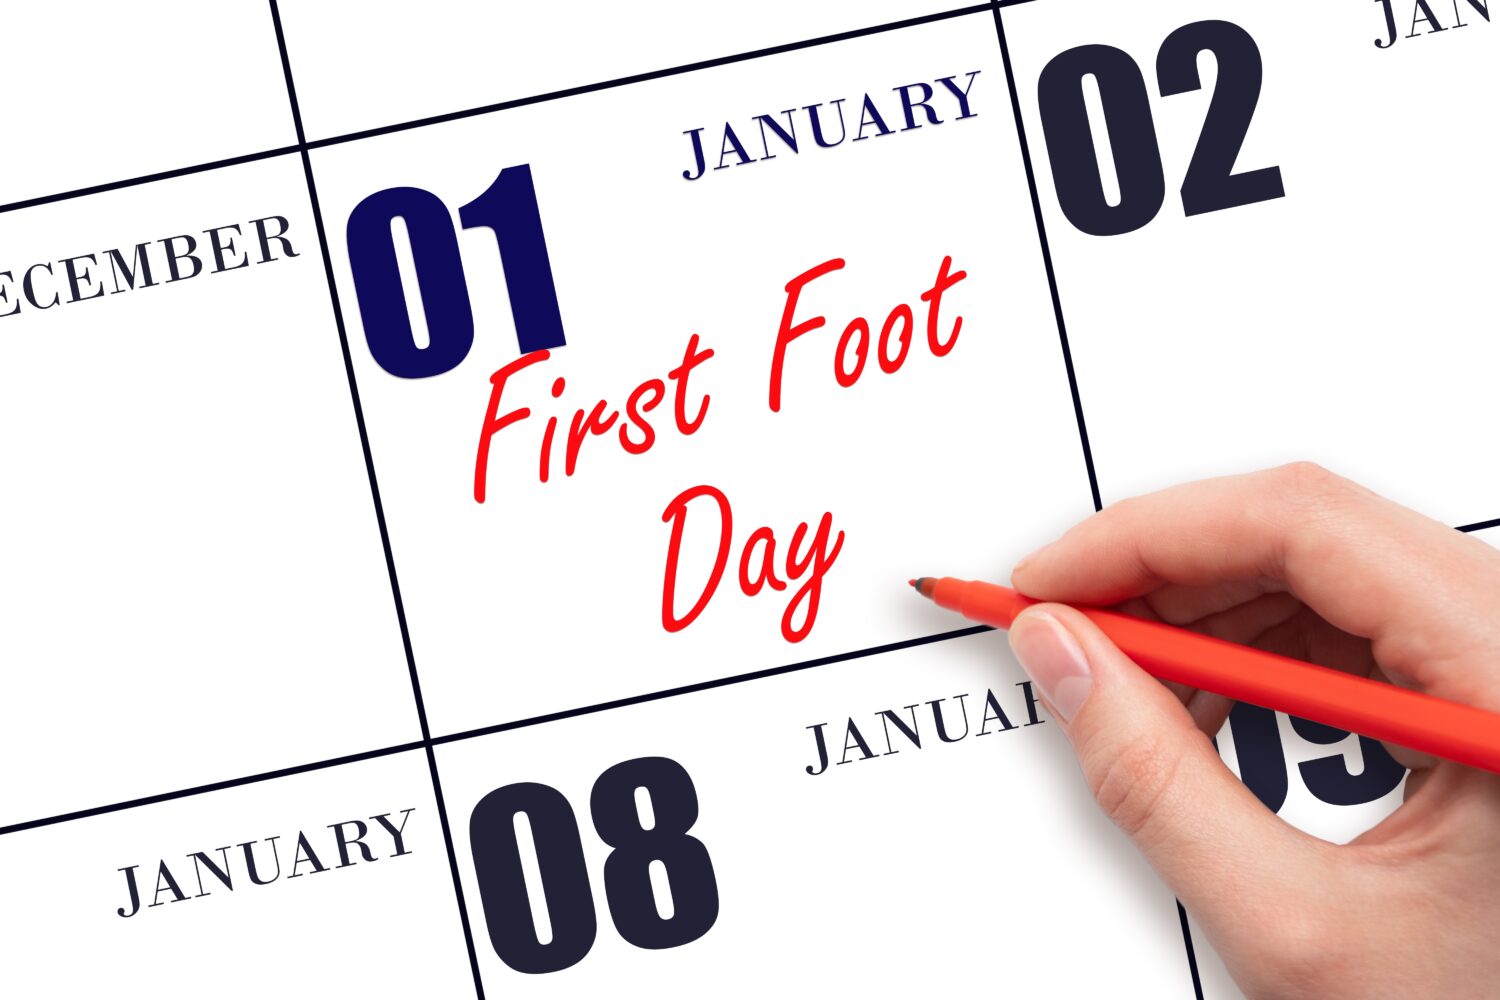 January 1. Hand writing text First Foot Day on calendar date. Save the date. Holiday. Day of the year concept.